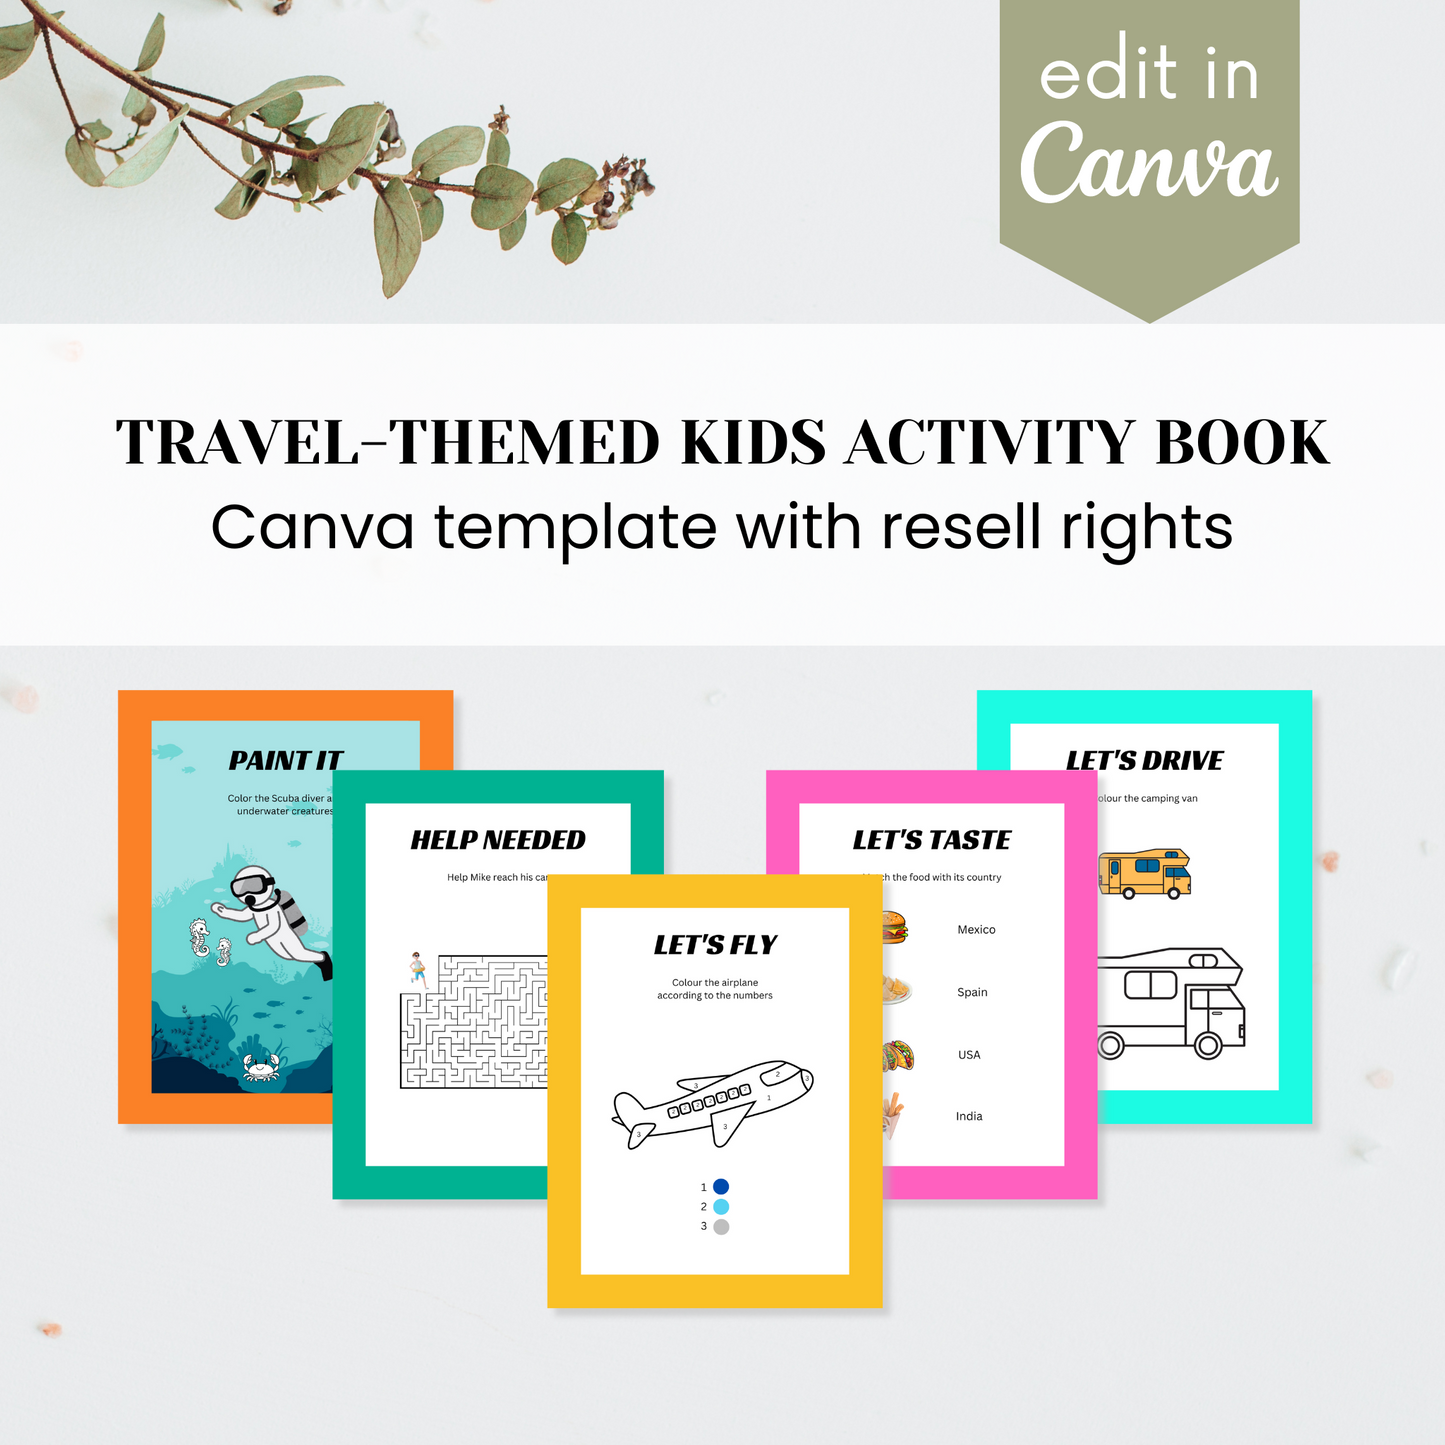 Travel-themed Kids Activity Book Template